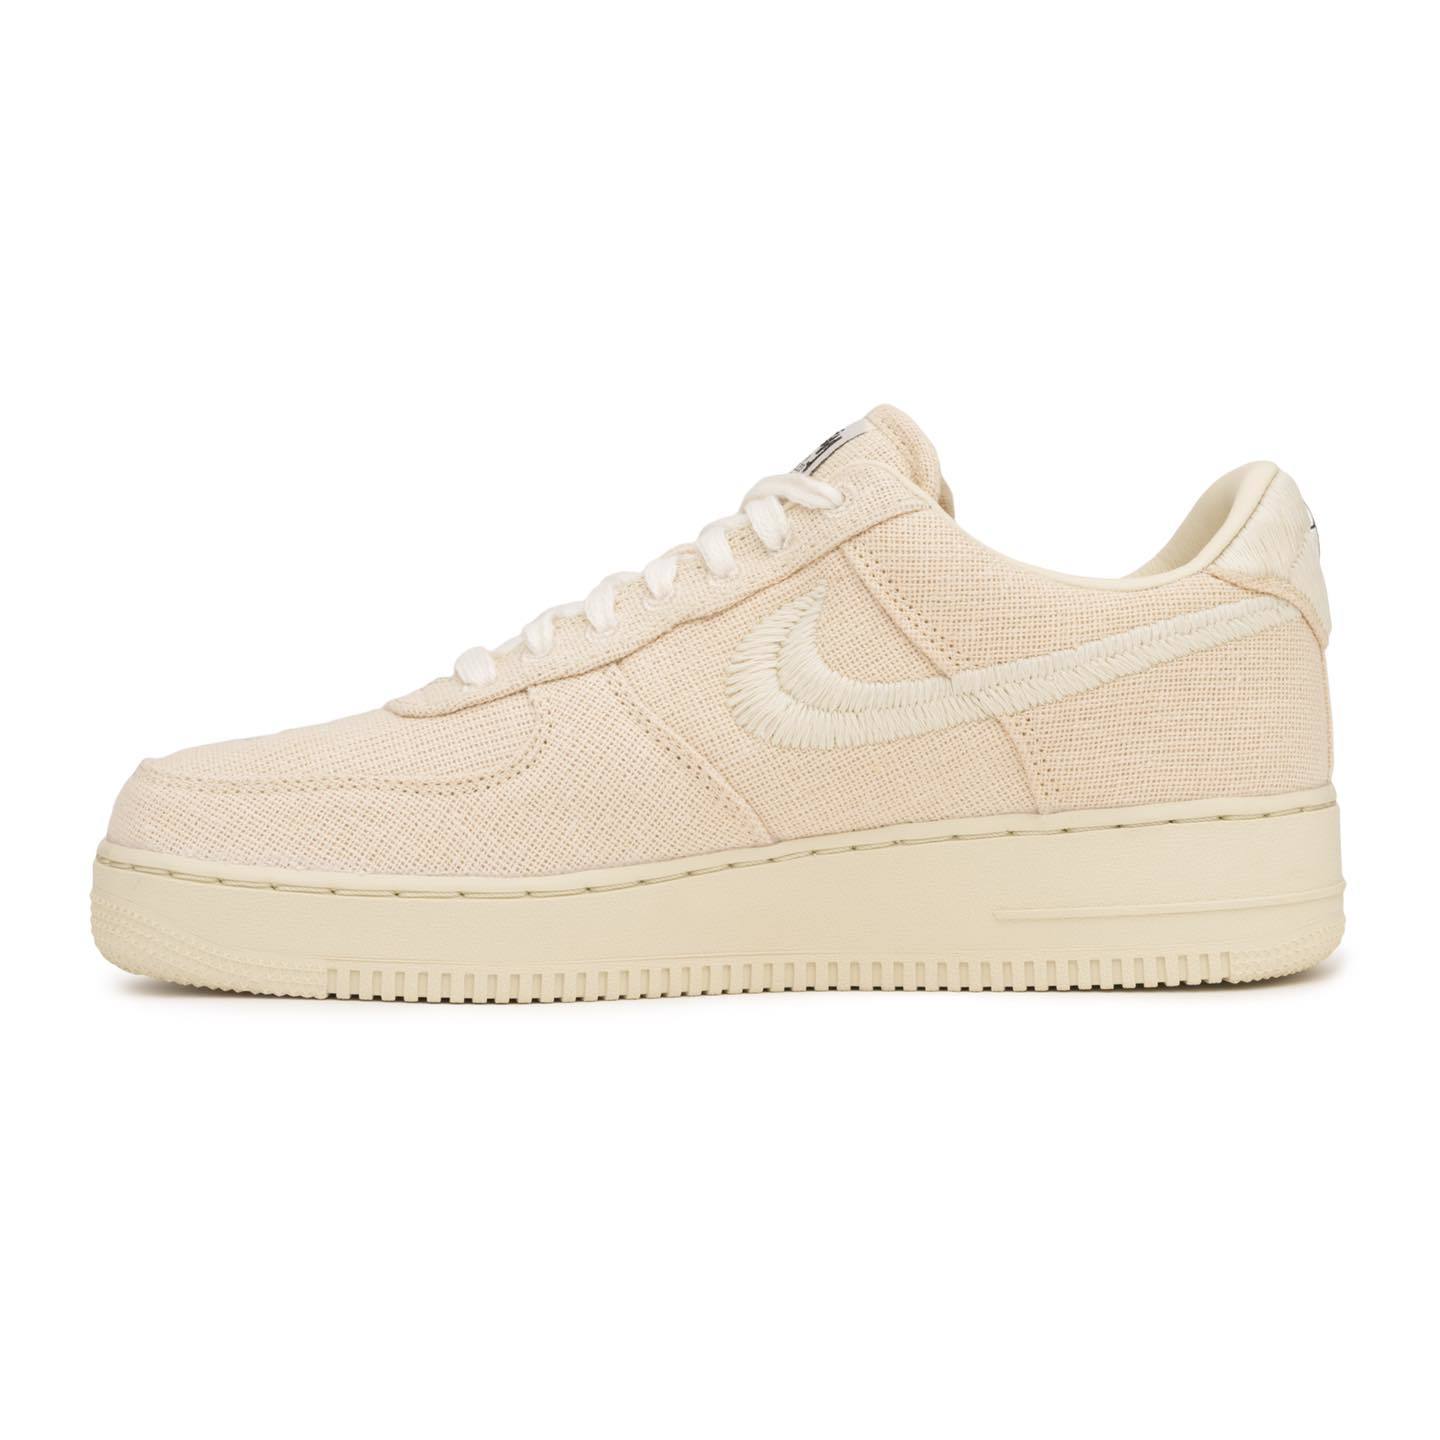 Stussy Nike Air Force 1 Low Fossil Stone 27.5cm CZ9084-200-